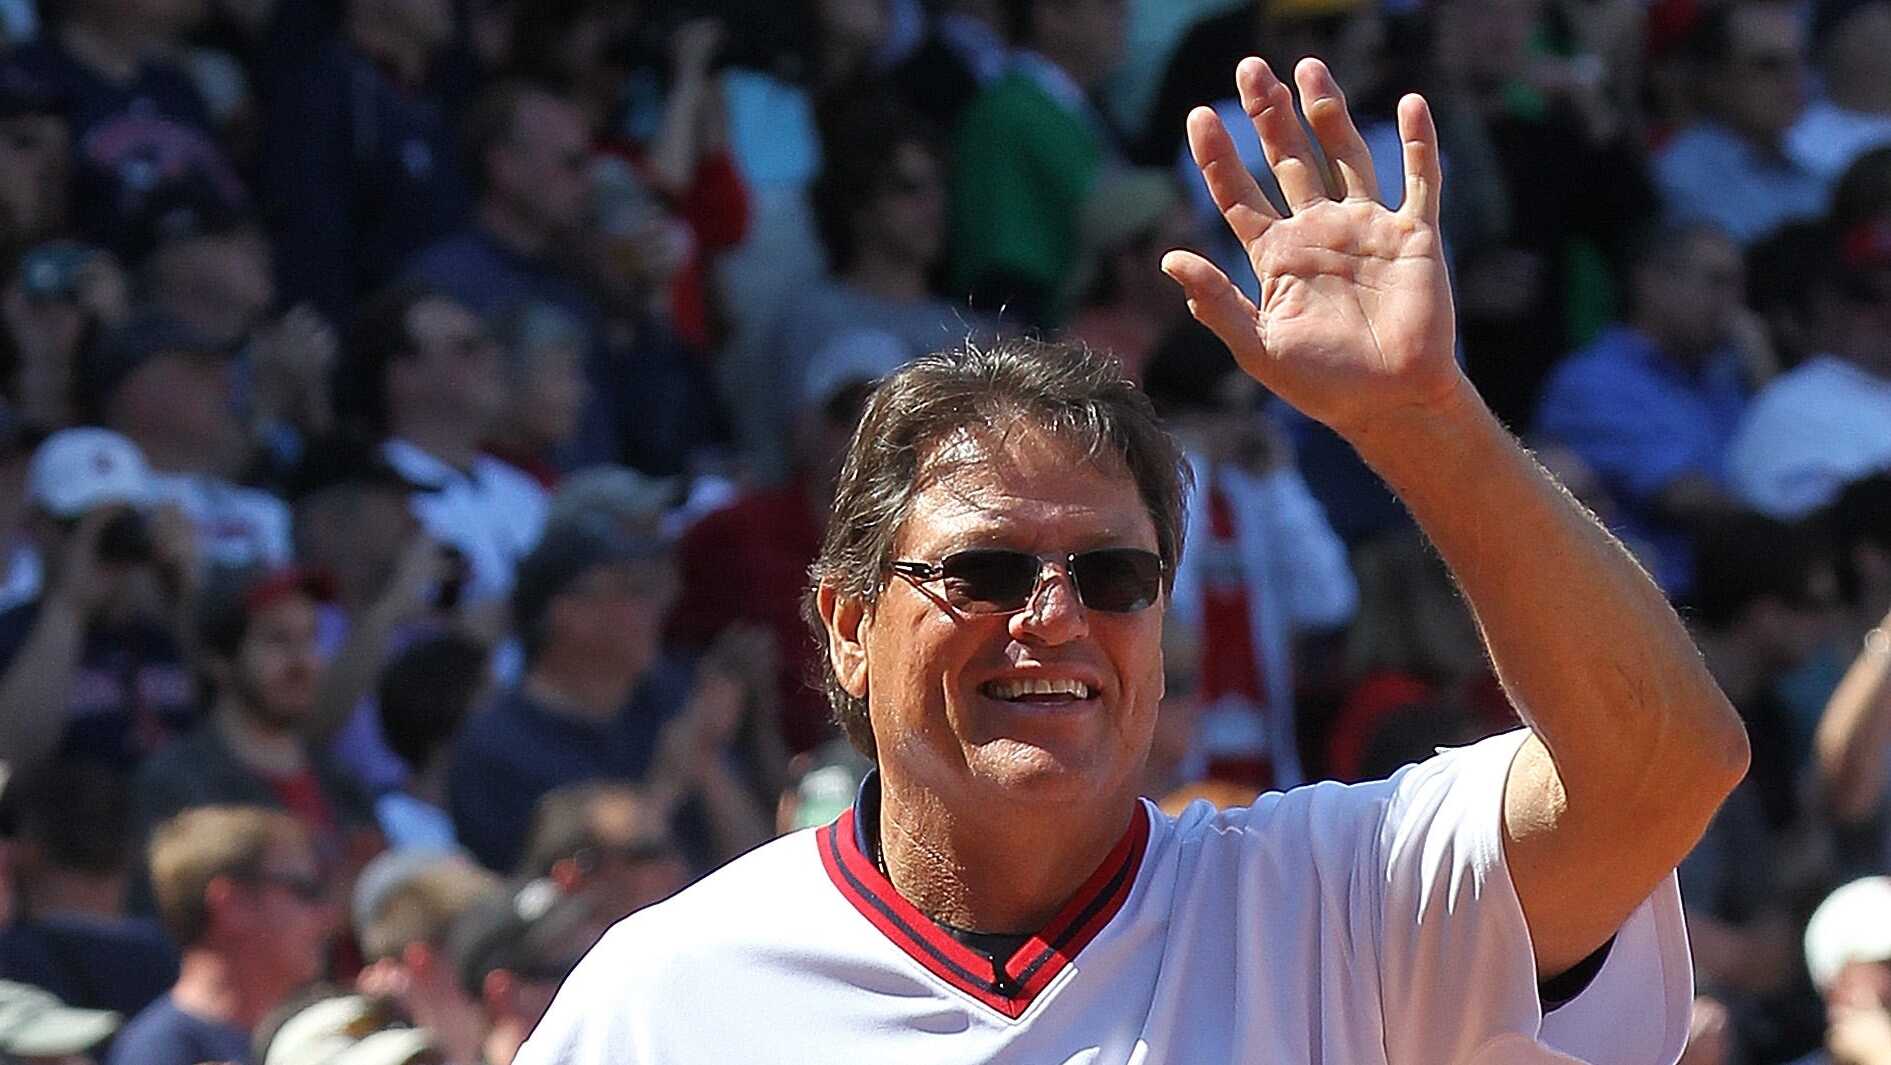 20-facts-about-carlton-fisk